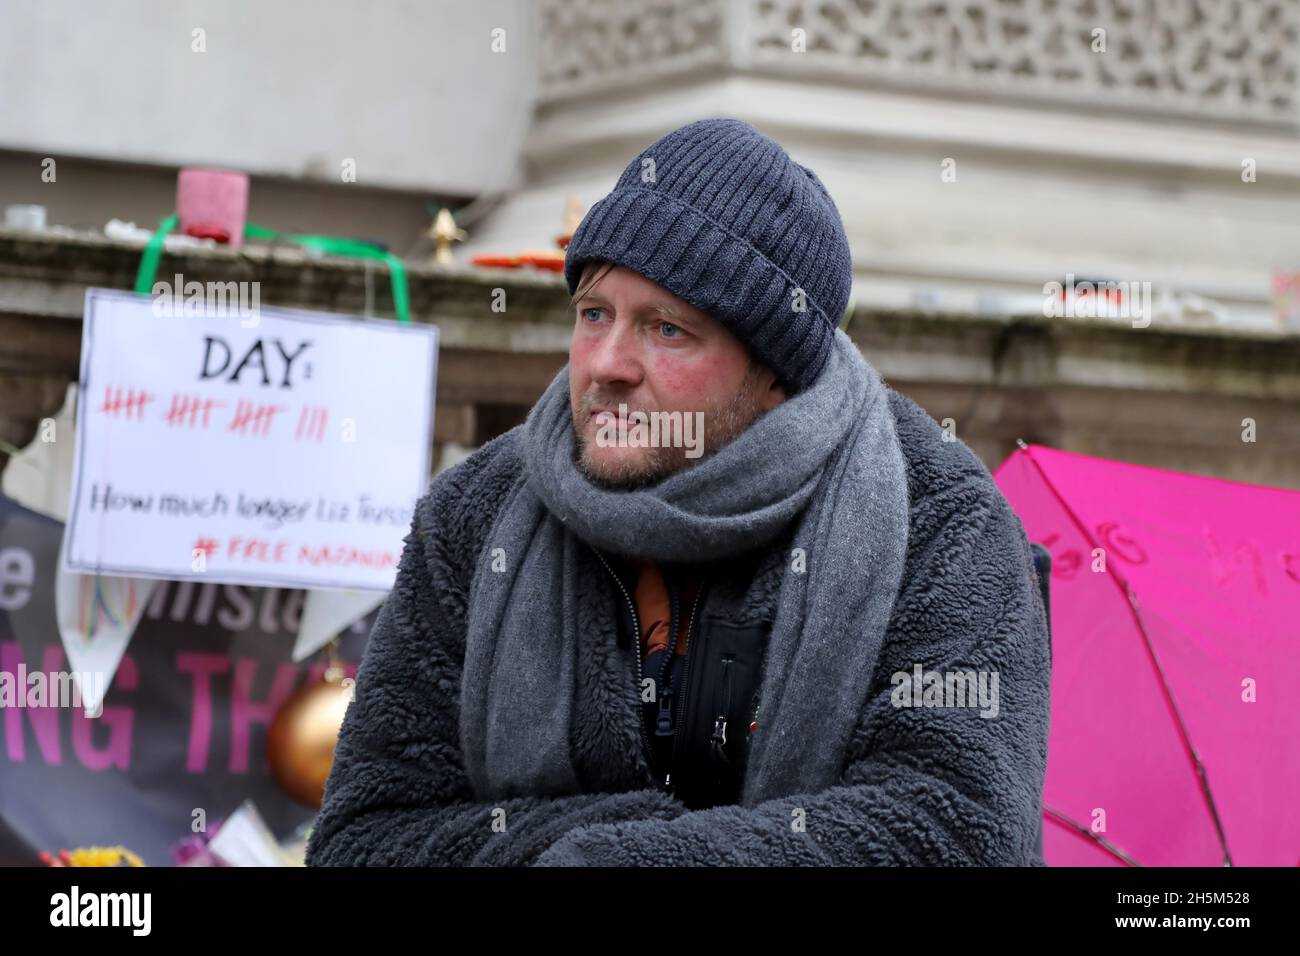 London, UK, 10 November 2021: Richard Ratcliffe on day 18 of a hunger strike at the UK Foreign Office to press the UK to secure the return of his wife Stock Photo